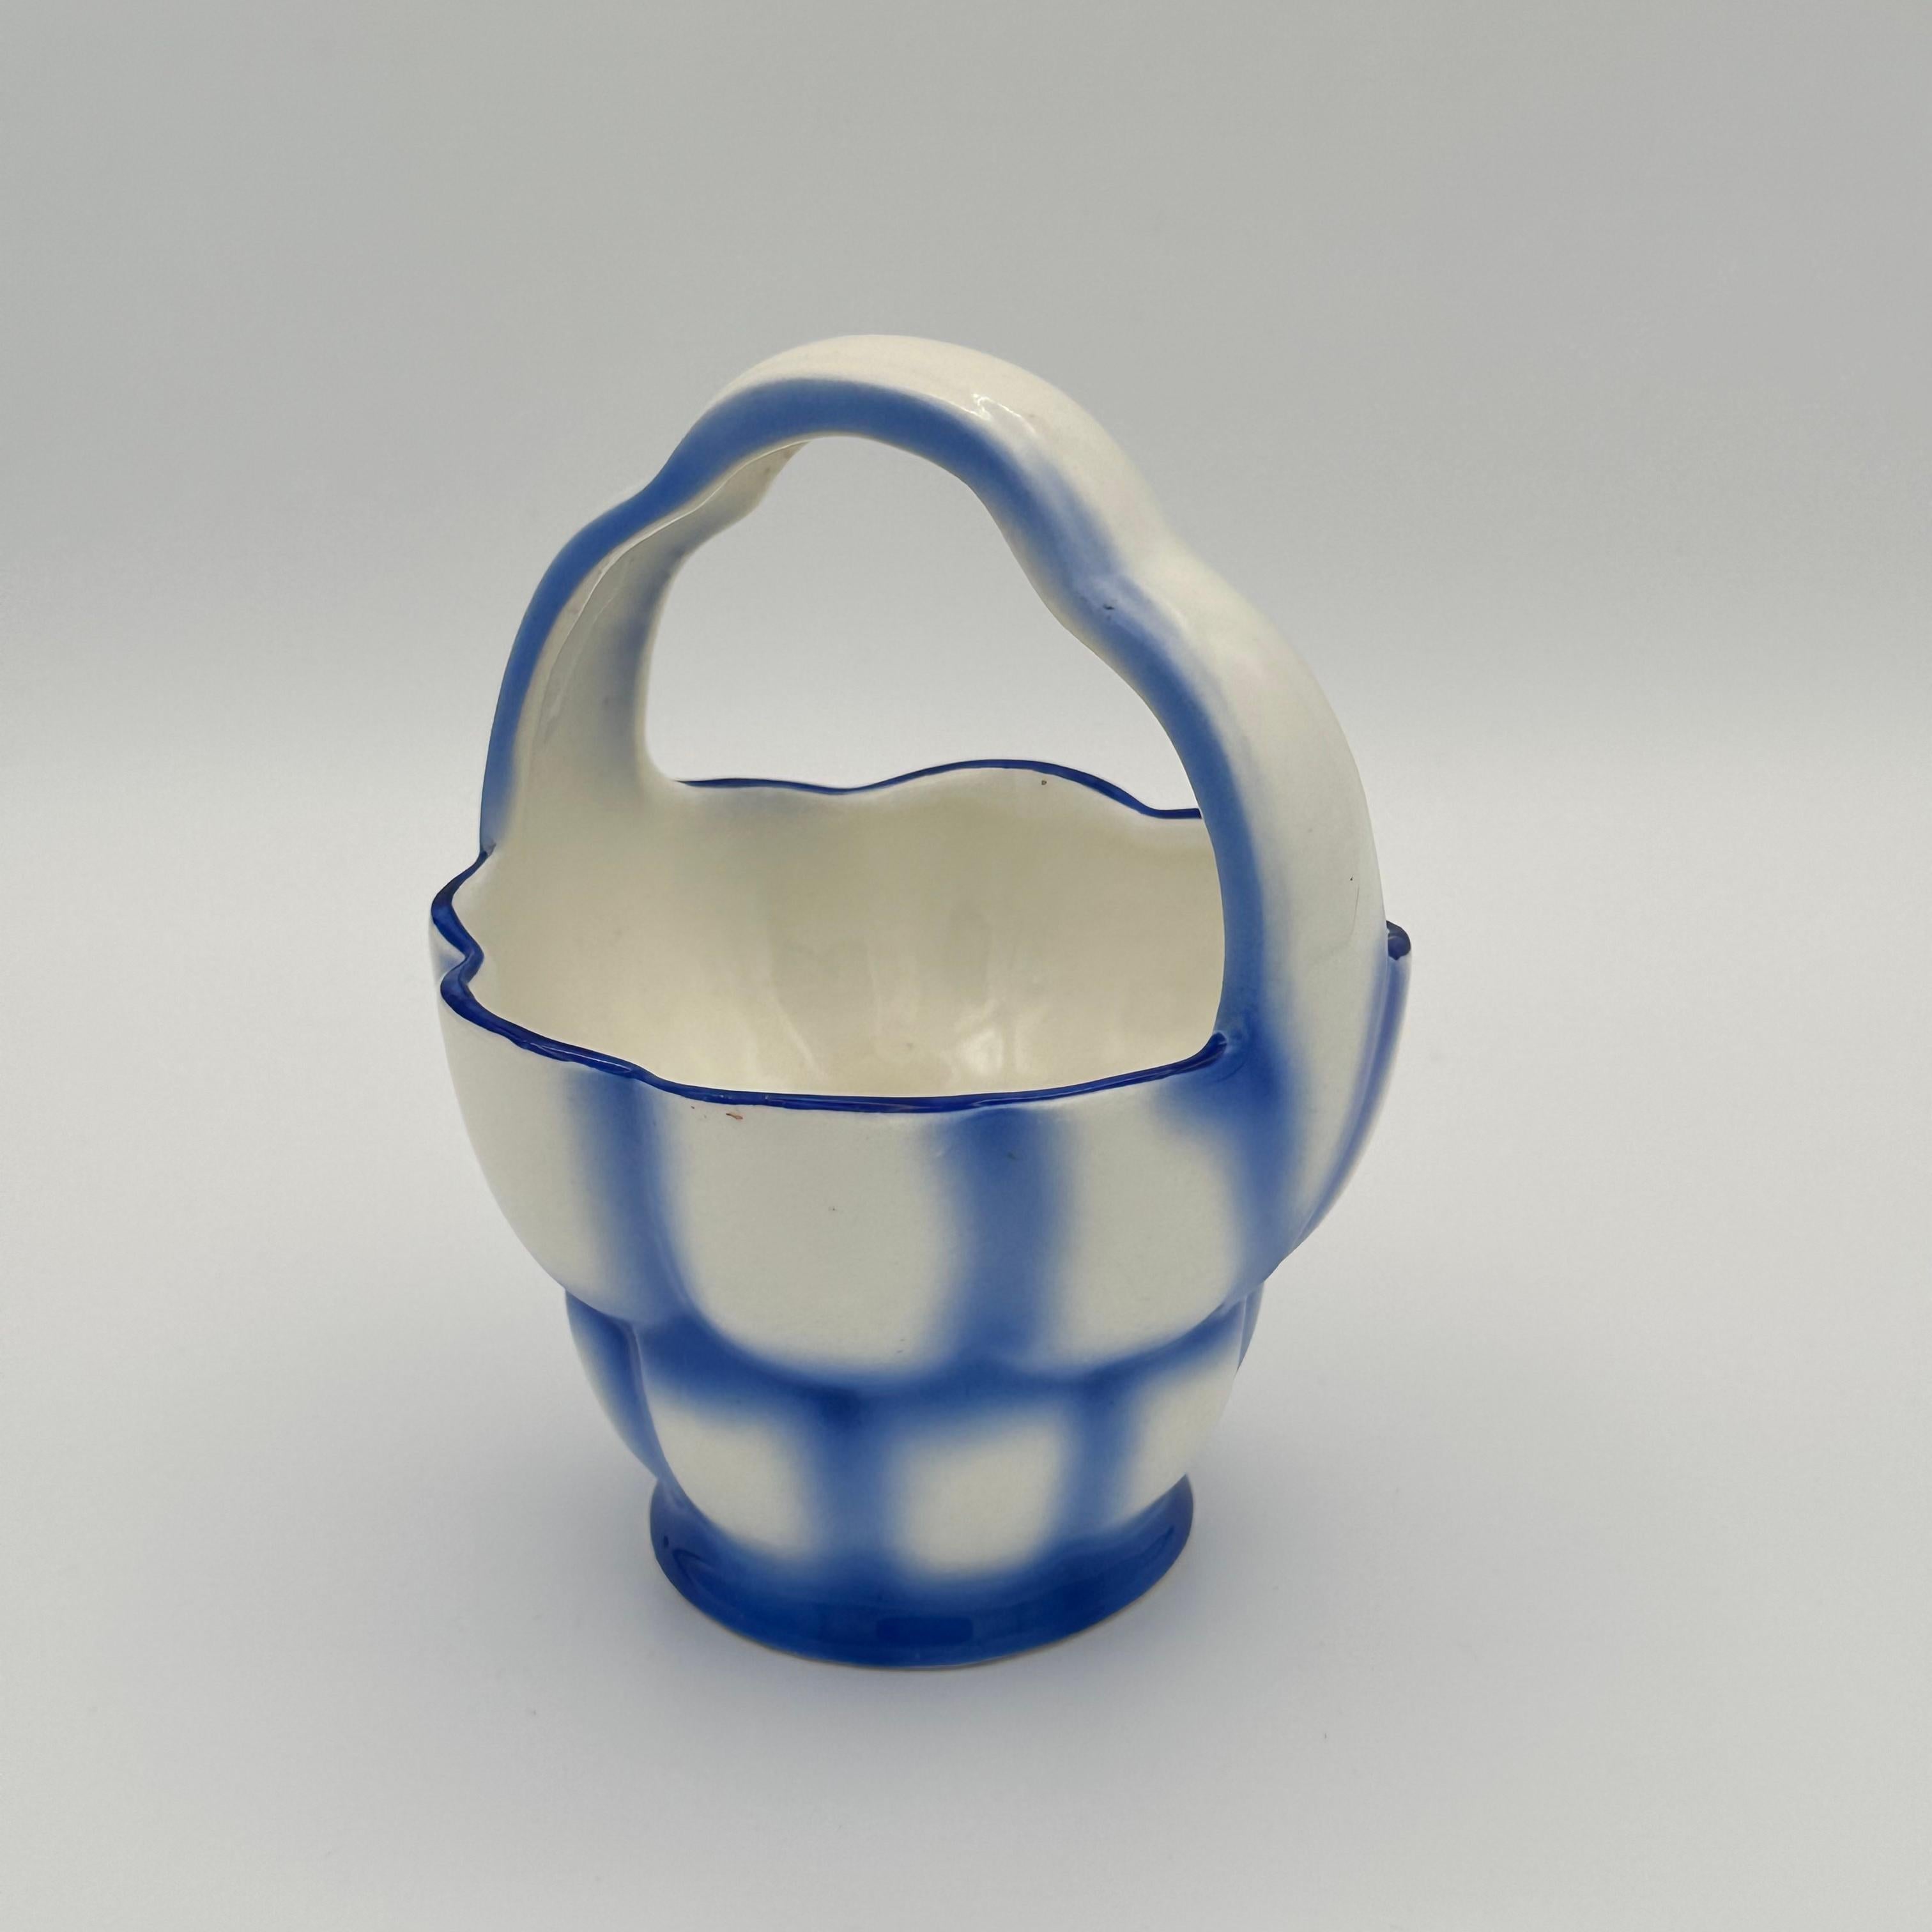 Vintage Blue and White Art Deco Spritzdekor Ceramic Basket from Czechoslovakia. This vessel is executed in the Art Deco 